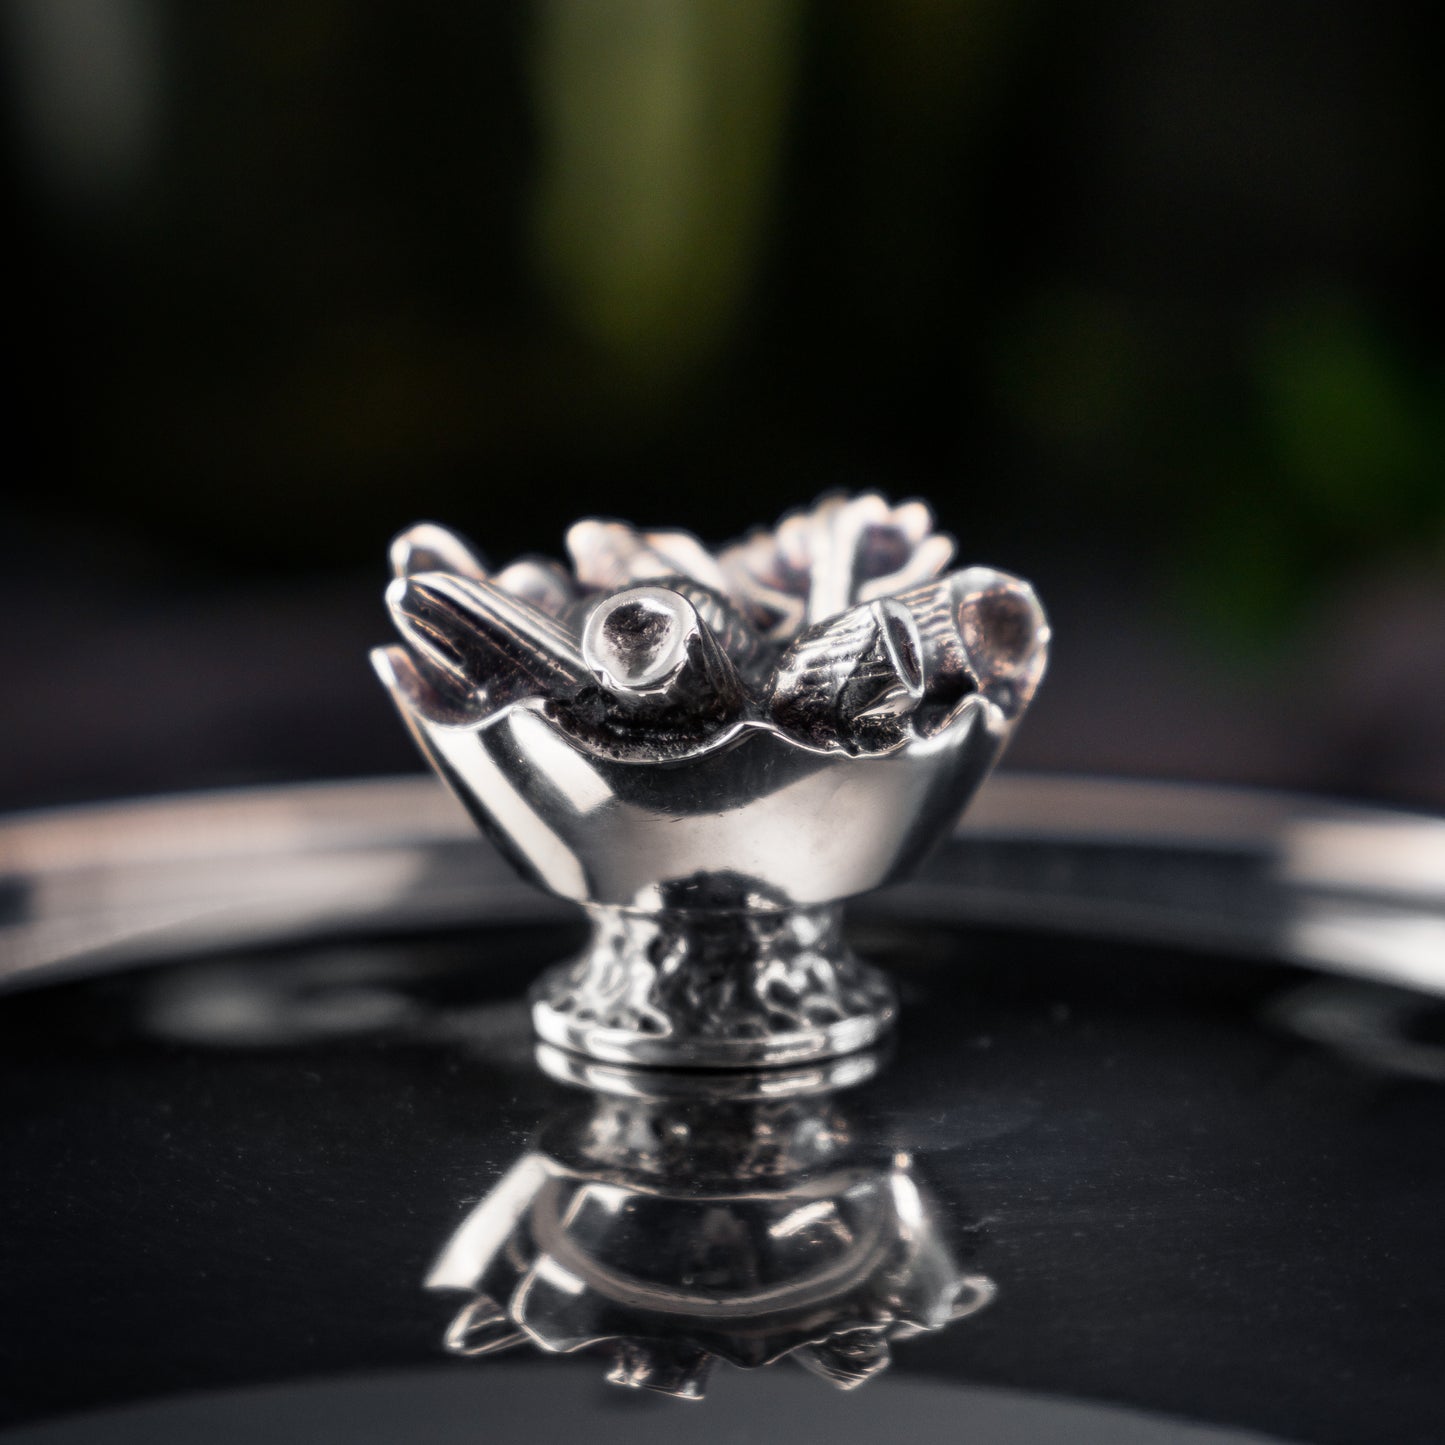 Silver plated, hand cast bronze knob in the shape of a crown filled with pasta, on top of the copper and stainless steel cookware The Pasta Queen by Ruffoni Collection